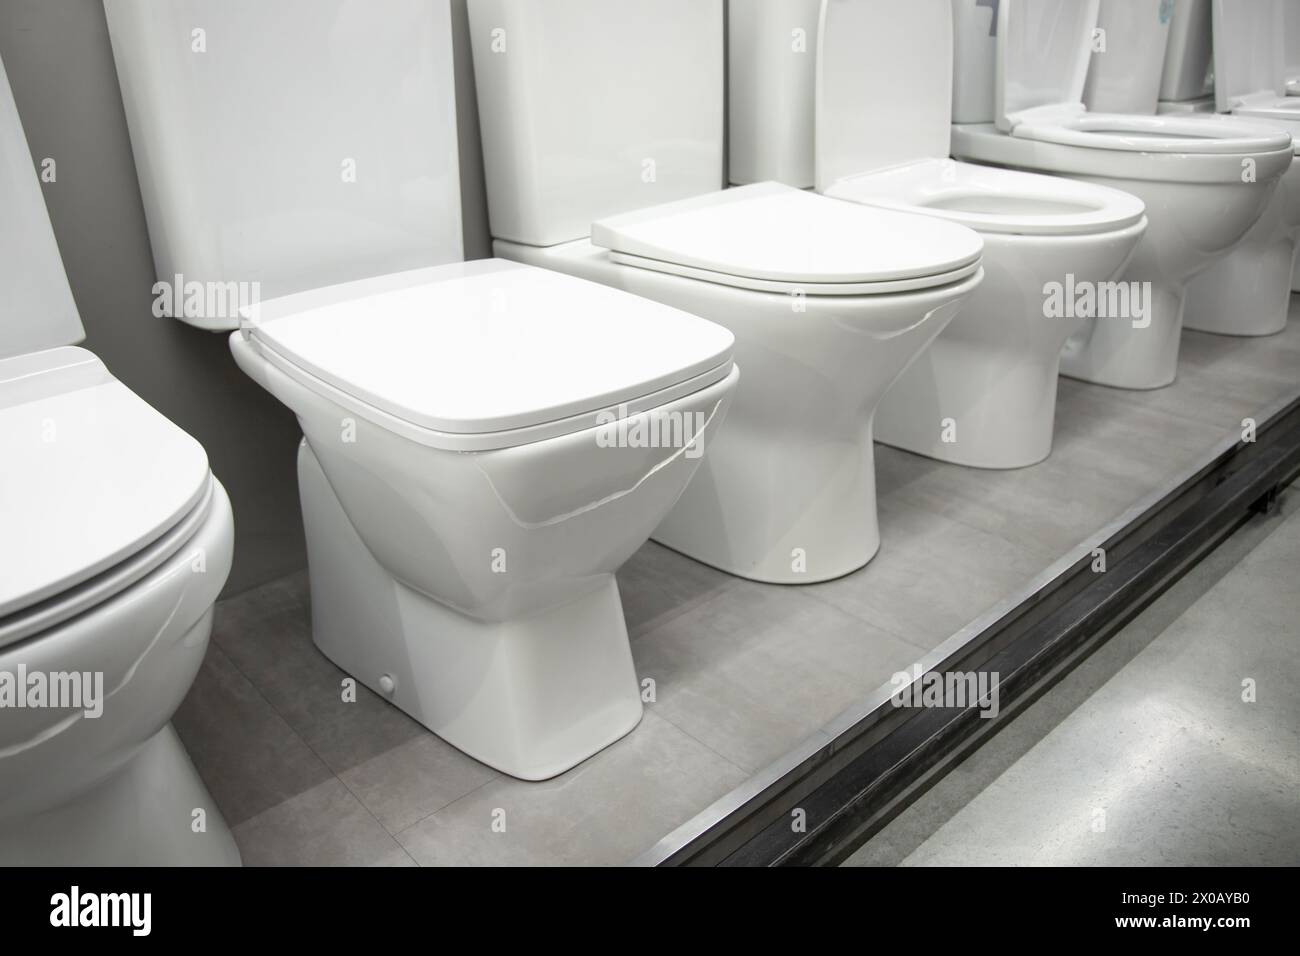 Ceramic toilet bowls of various shapes and sizes Stock Photo